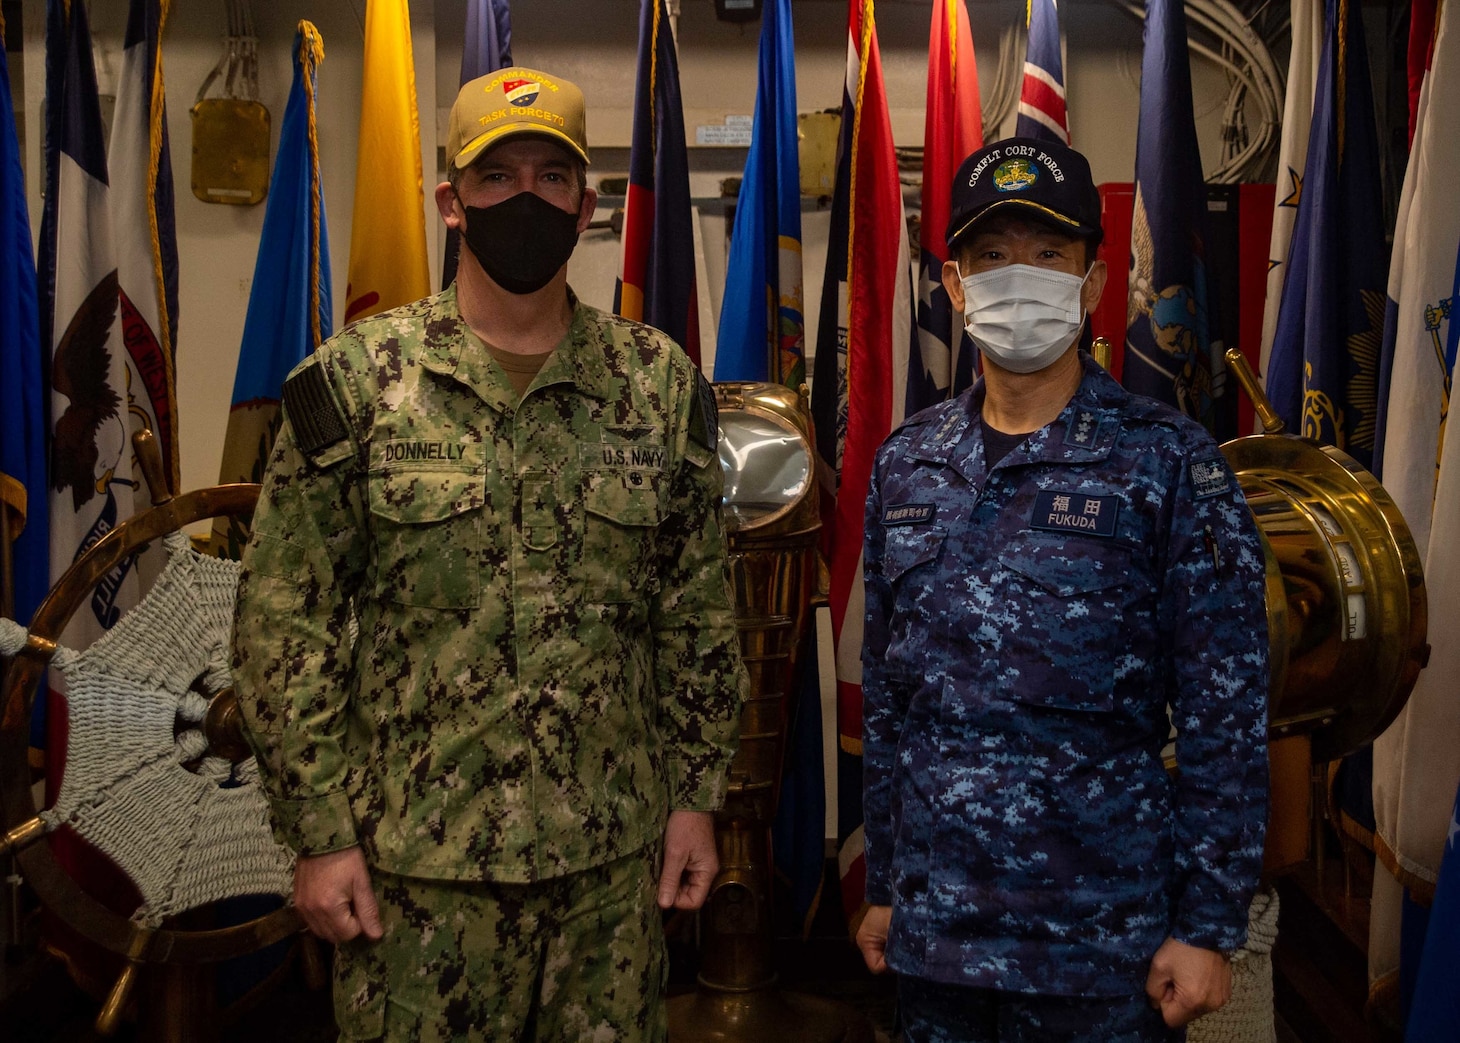 YOKOSUKA, Japan (April 15, 2022) Vice Adm. FUKUDA Tatsuya, commander, Fleet Escort Force, Japan Maritime Self-Defense Force and Rear Adm. Michael Donnelly, commander, Task Force (CTF) 70, pose for a photo following flag talks aboard the U.S. Navy’s only forward-deployed aircraft carrier, USS Ronald Reagan (CVN 76), flagship of Carrier Strike Group (CSG) 5. Flag talks allow commanders to plan for future operations, work through challenges or lessons learned, while building towards greater collaboration when their forces operate together in the maritime environment. CTF 70/CSG 5 is forward-deployed to the U.S. 7th Fleet area of operations in support of a free and open Indo-Pacific (U.S. Navy photo by Mass Communication Specialist 2nd Class Askia Collins)